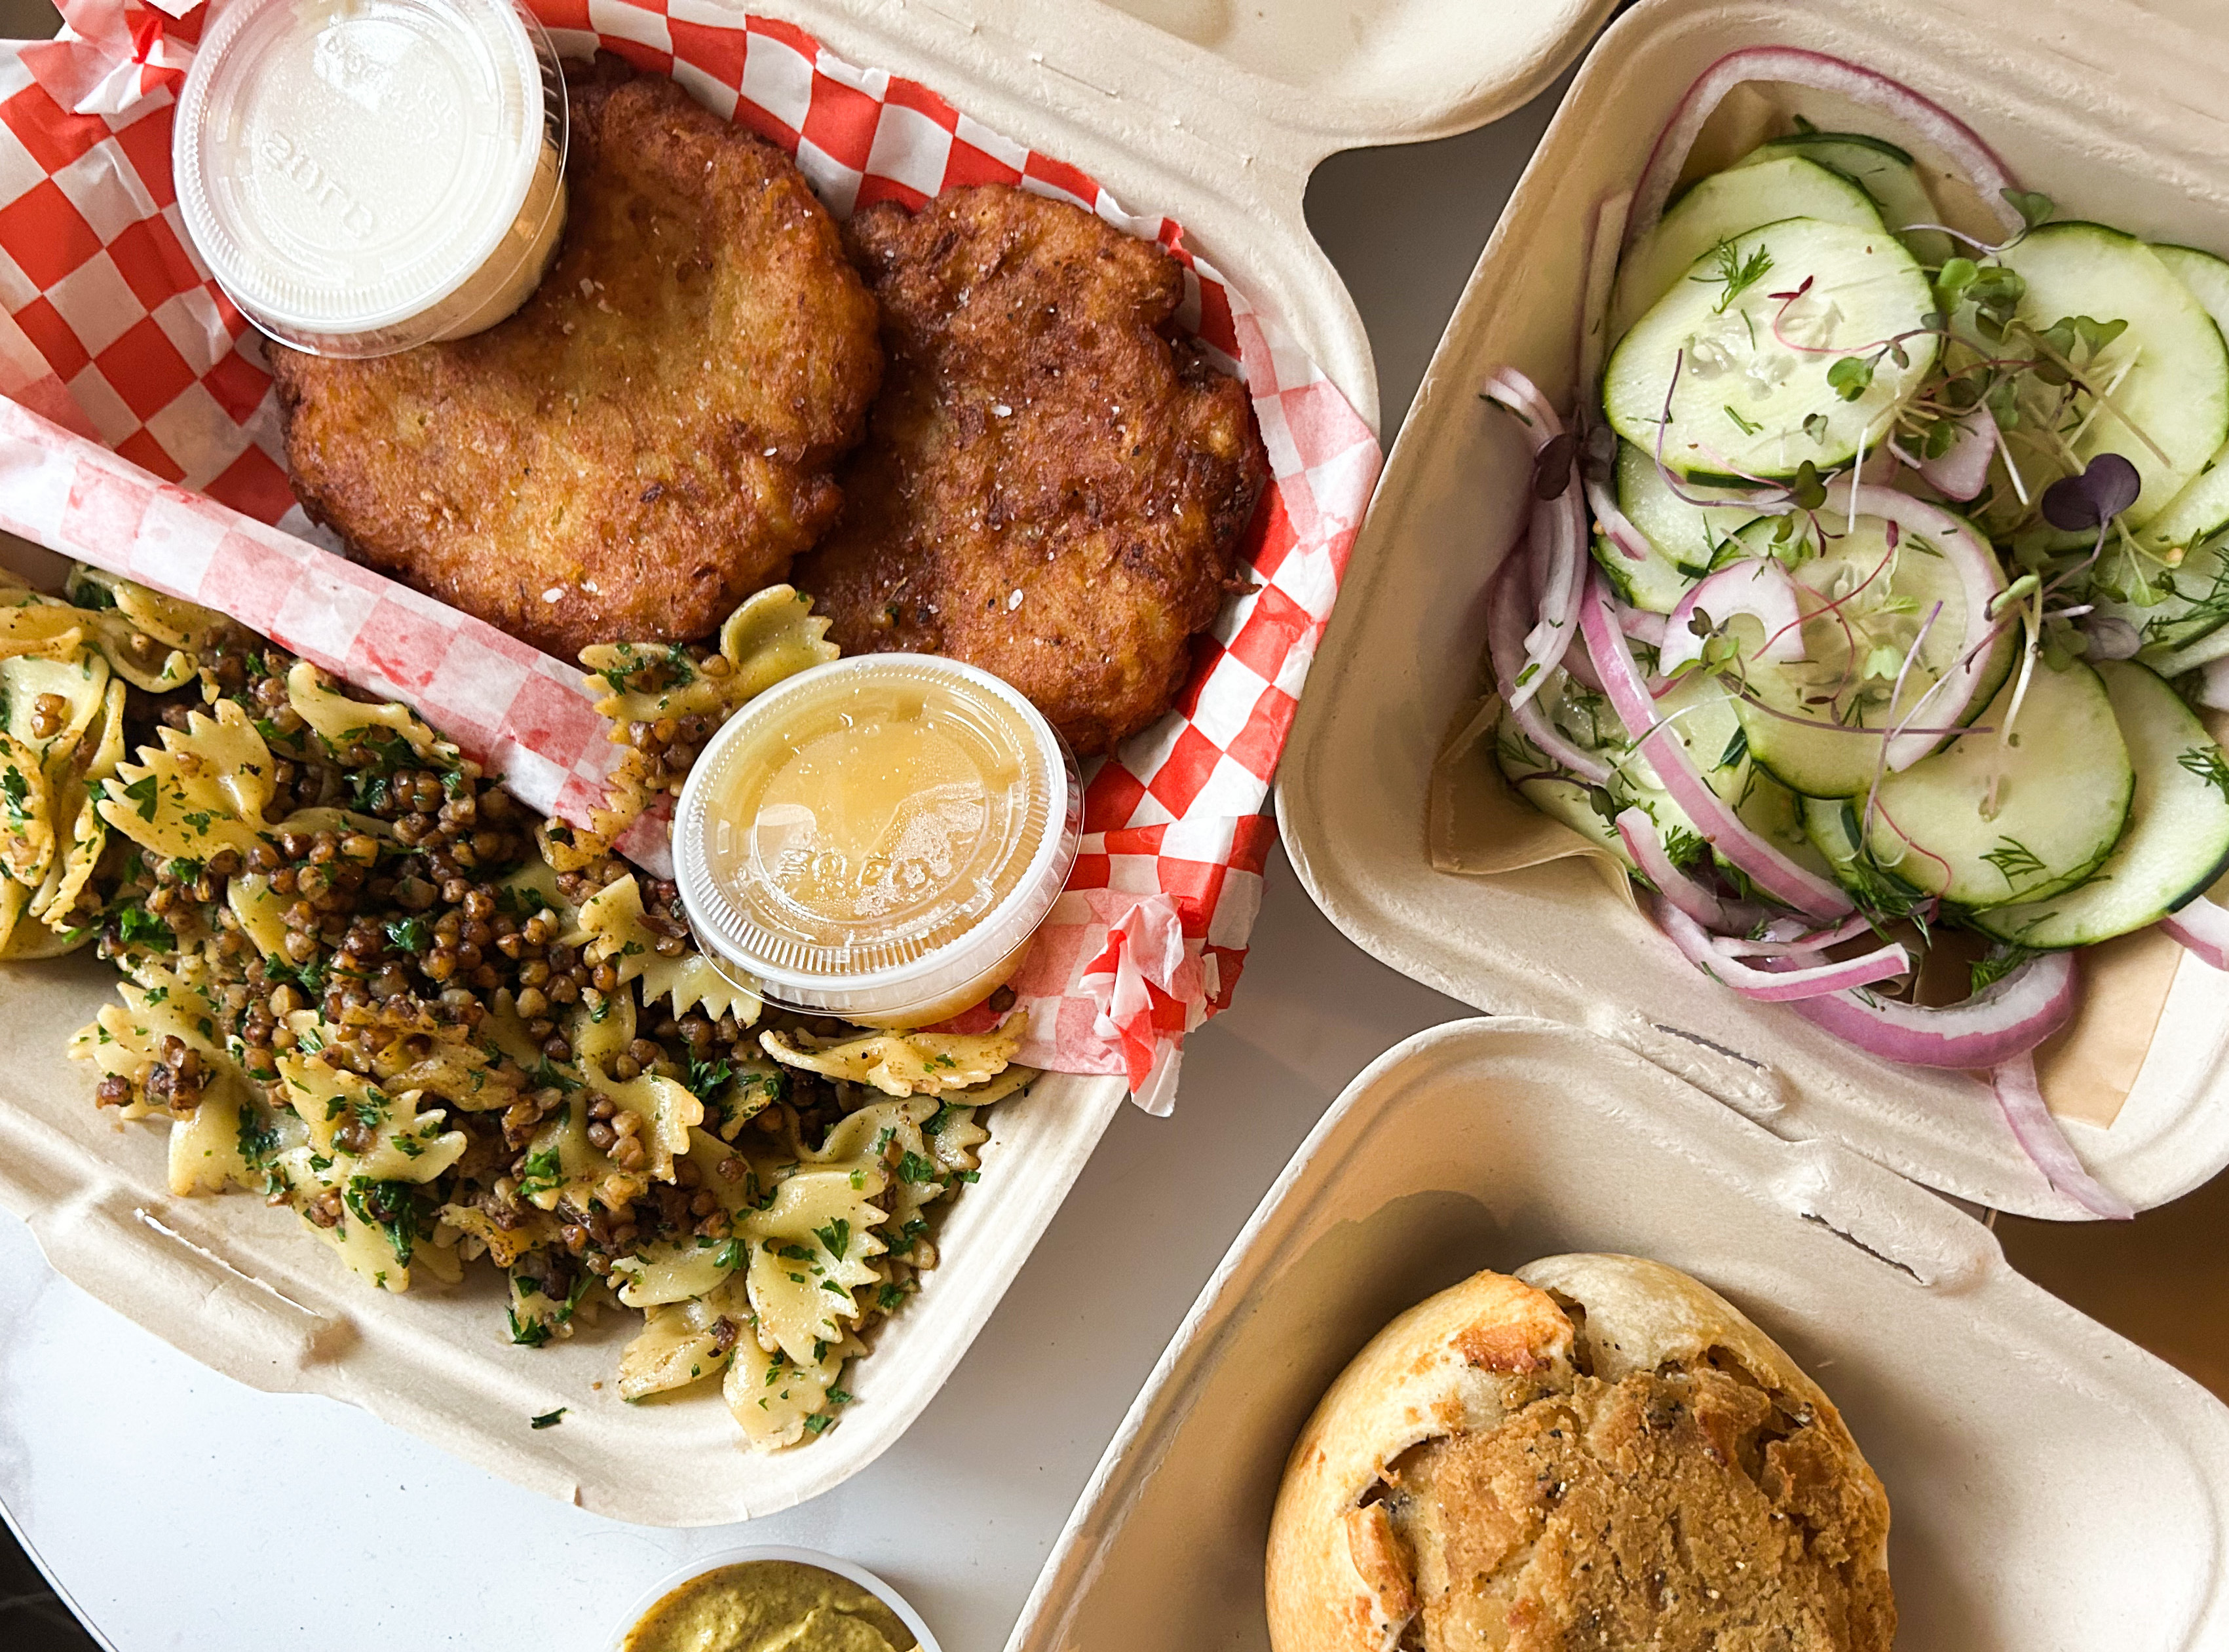 Takeout containers of latkes with sour cream and applesauce, kasha varnishkes, a potato knish, and cucumber salad sit on a table.